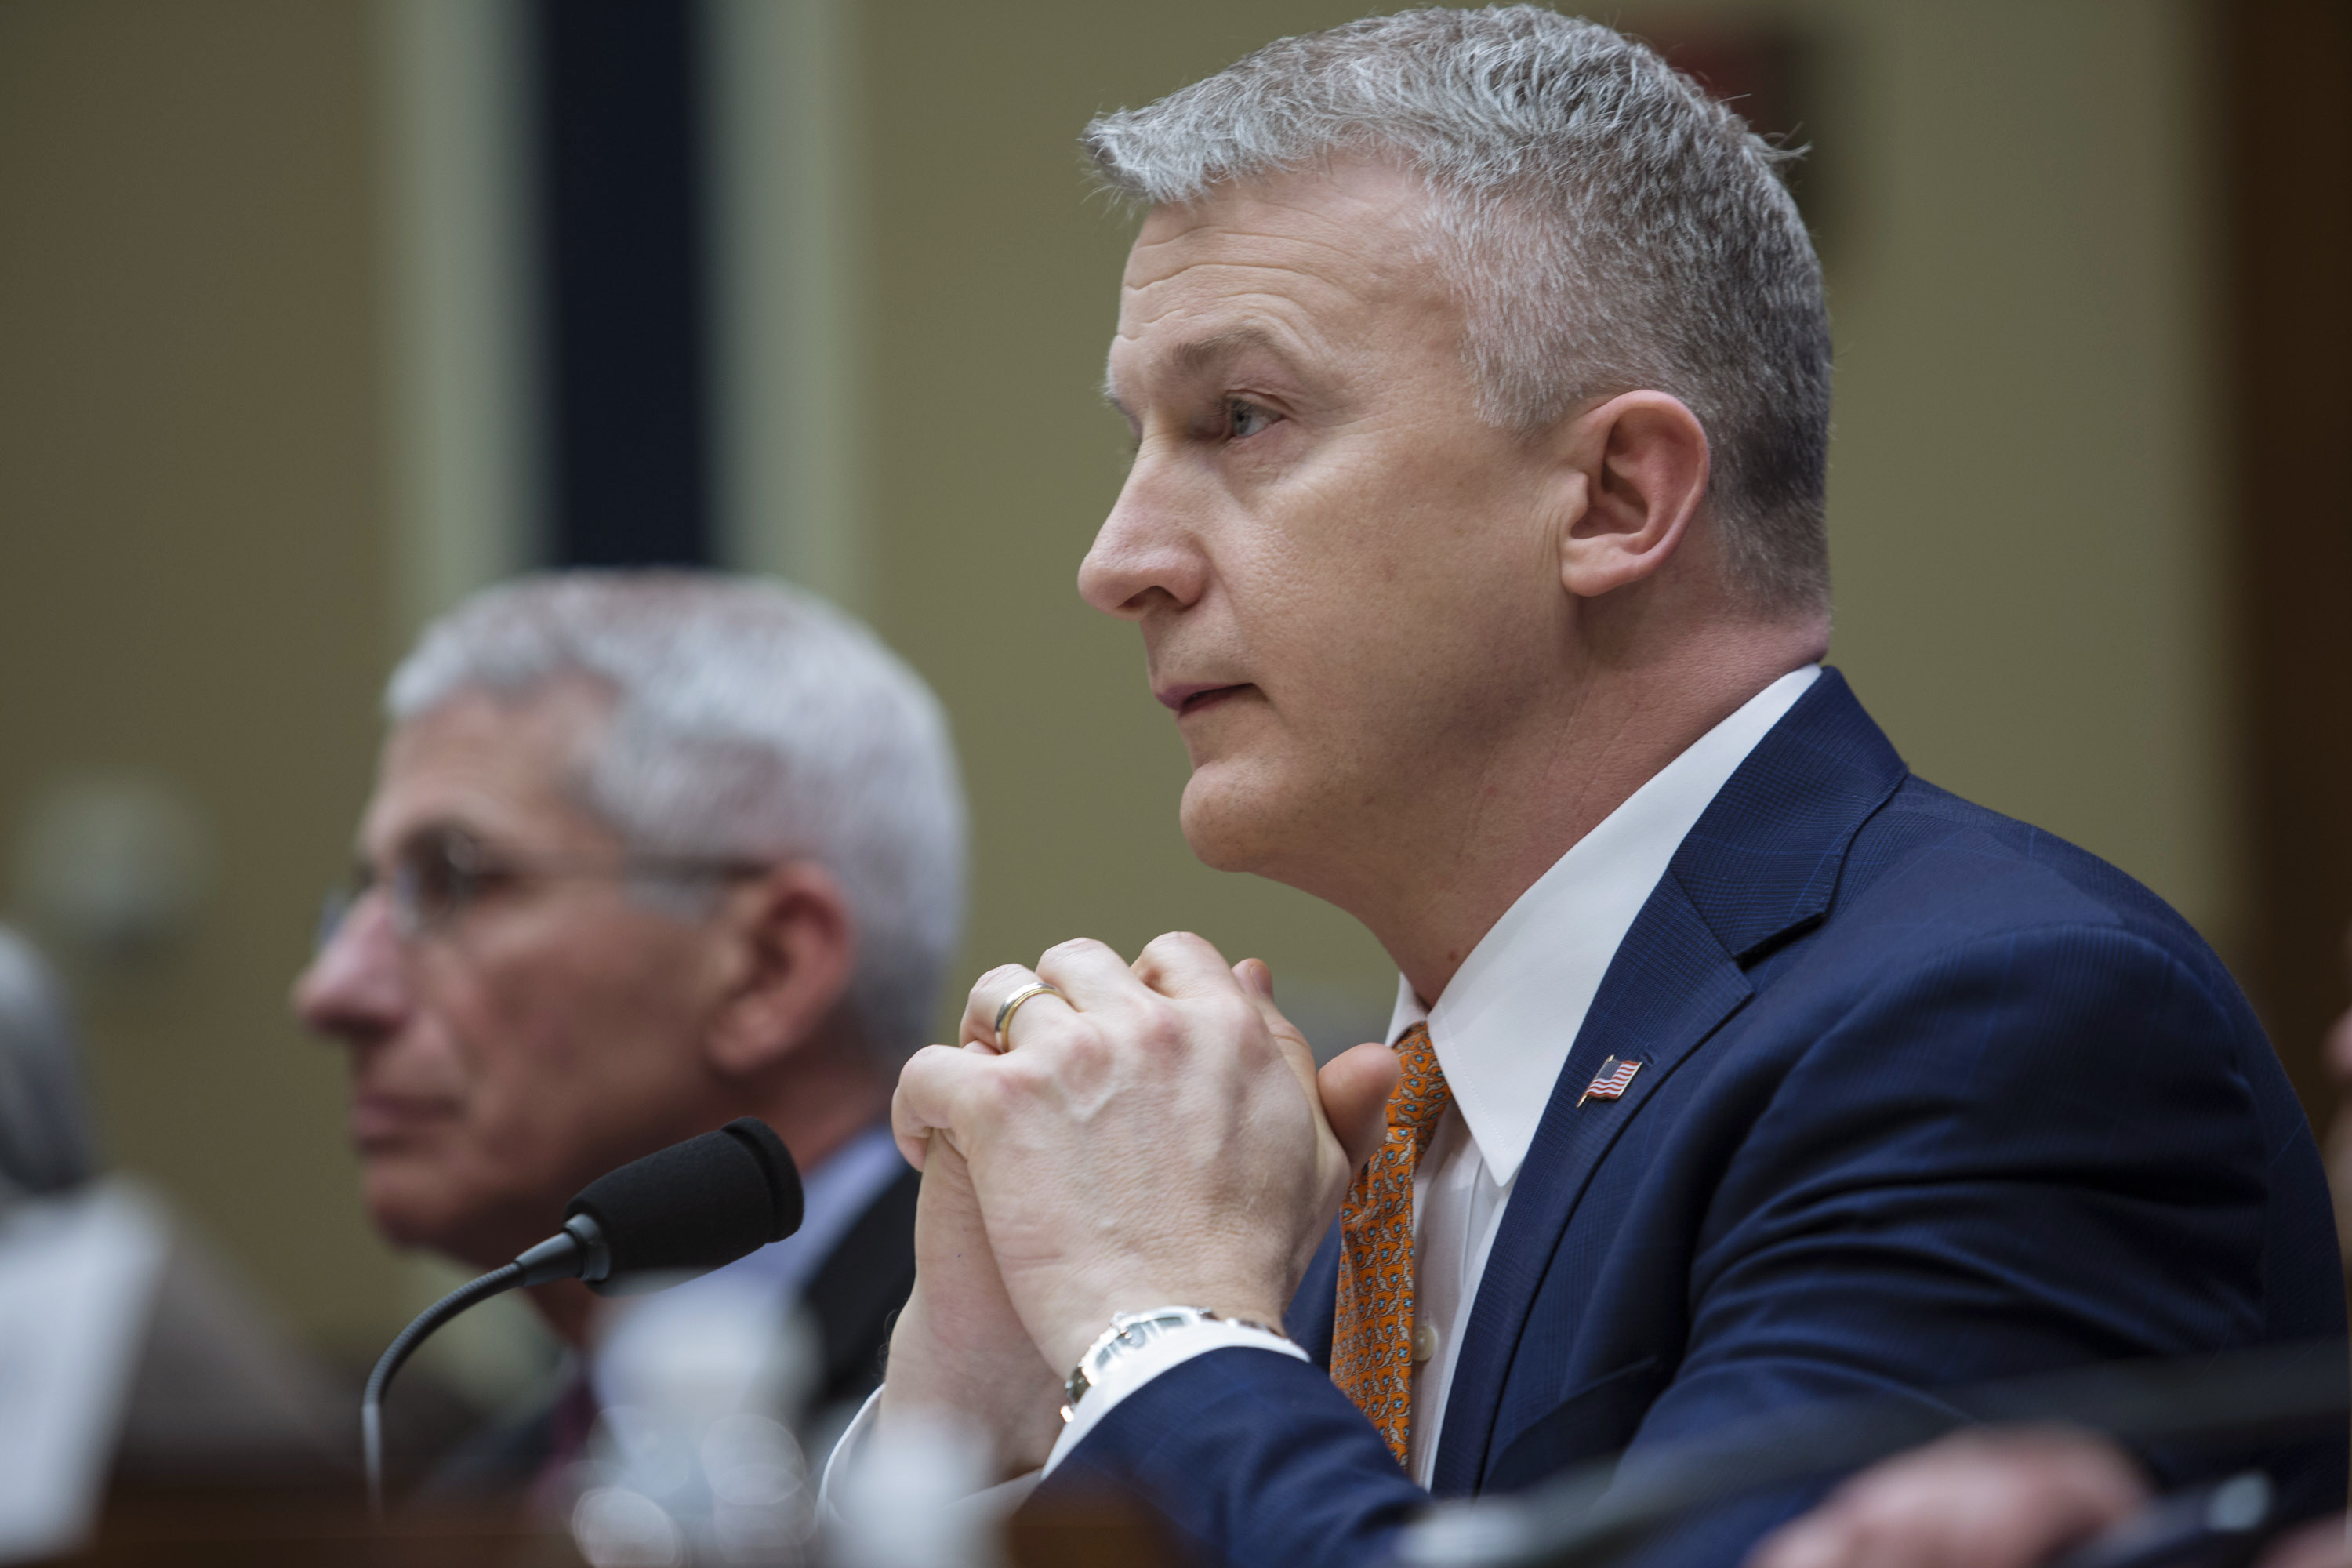 Dr. Rick Bright, then deputy assistant secretary for preparedness and response for Health and Human Services, listens during a hearing in Washington on March 8, 2018.